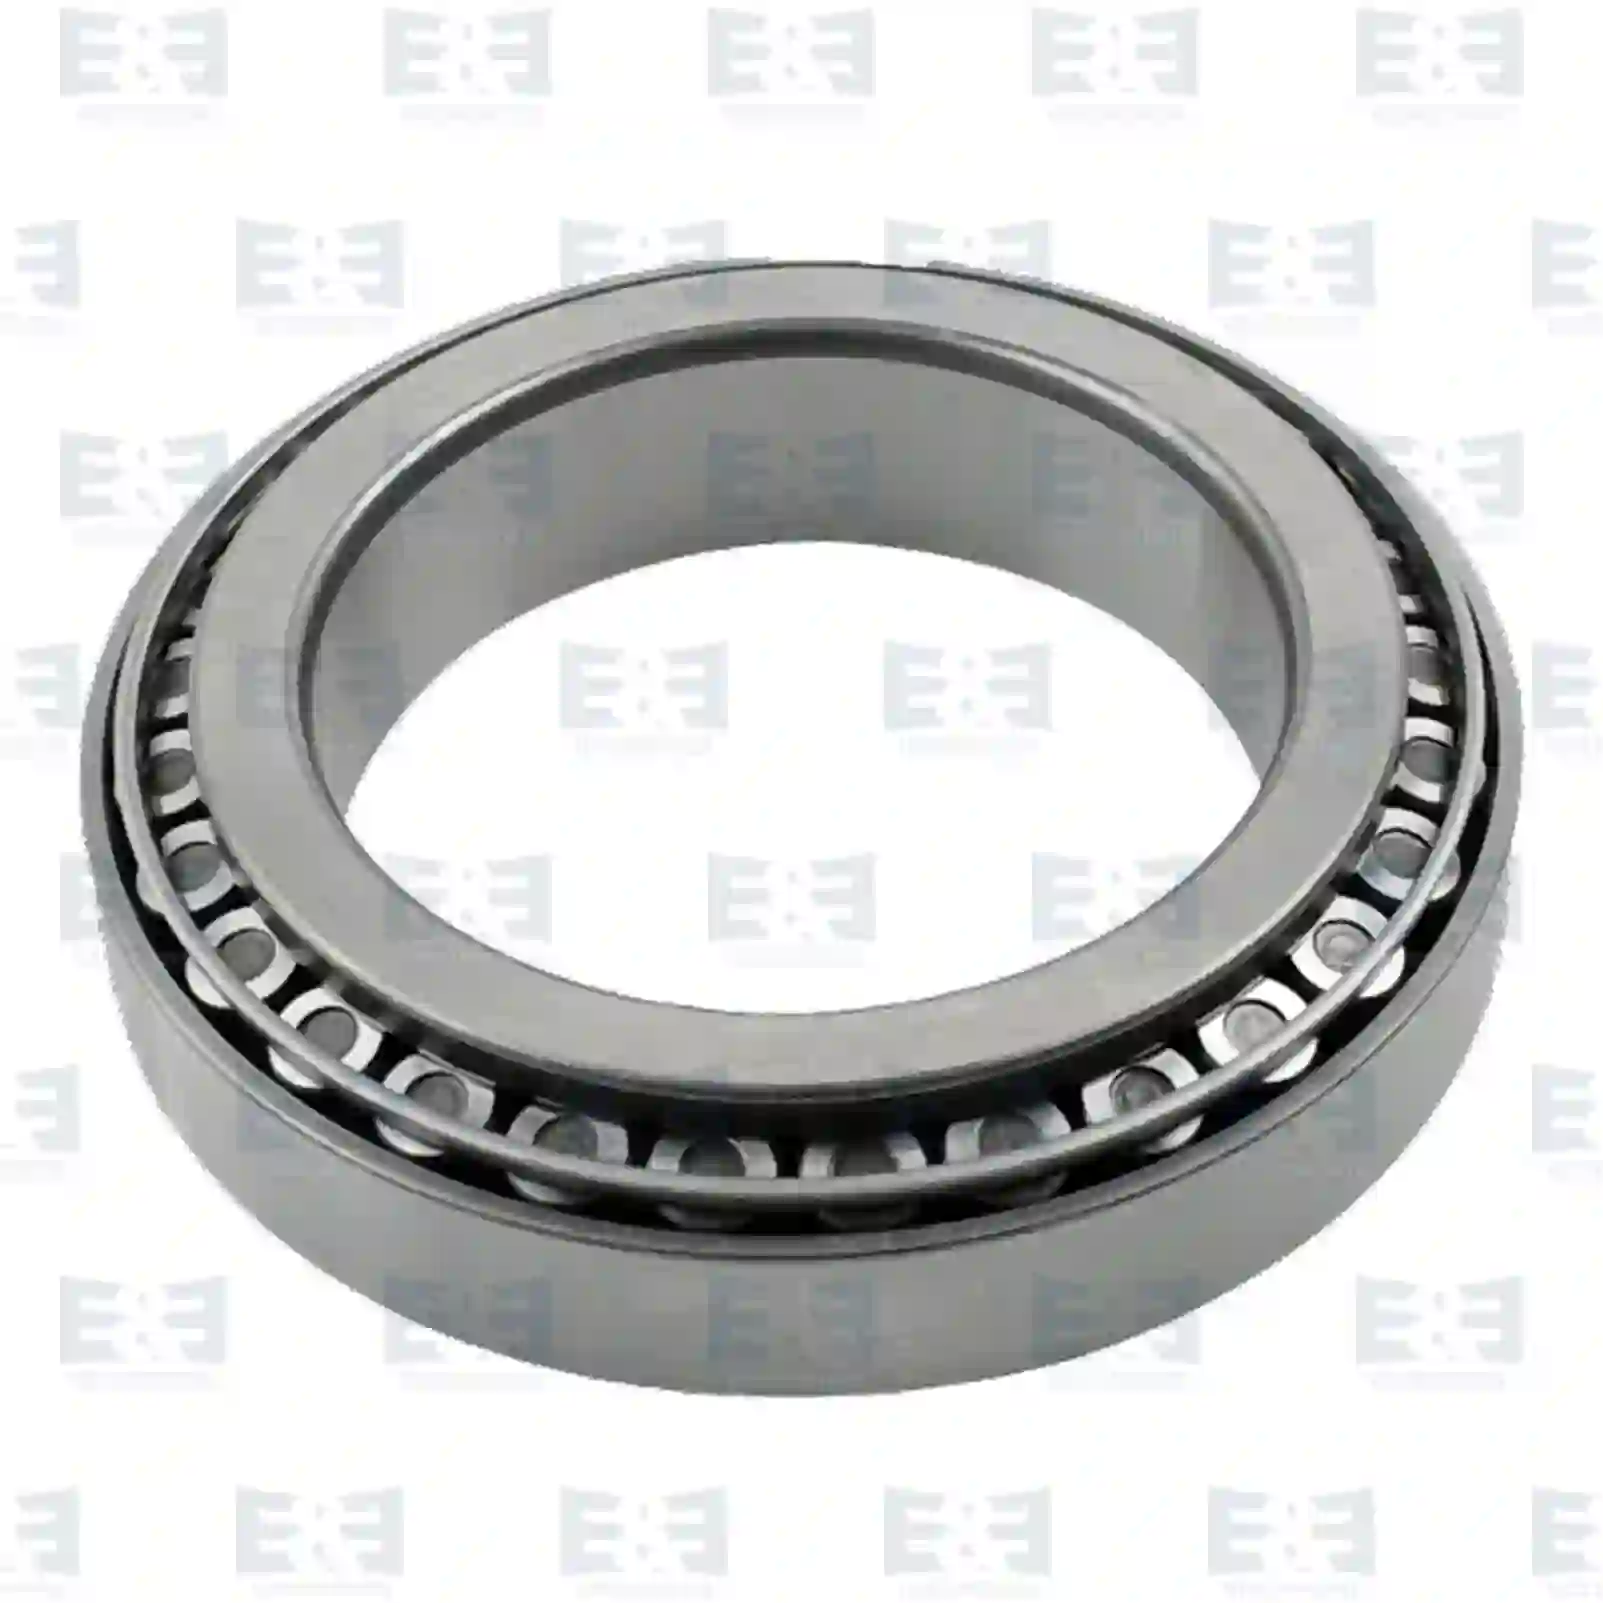 Rear Axle, Complete Tapered roller bearing, EE No 2E2270380 ,  oem no:0699117, 699117, 005103771, 01905027, 07984896, 93161536, 06324801500, 06324890119, 06324890121, 06324890122, 0019816405, 0019817205, 0049817405, 0069810405, 0069815505, 0179817905, 1364630, 164042, 274114, 334123, 184625, 2V5501283A E&E Truck Spare Parts | Truck Spare Parts, Auotomotive Spare Parts